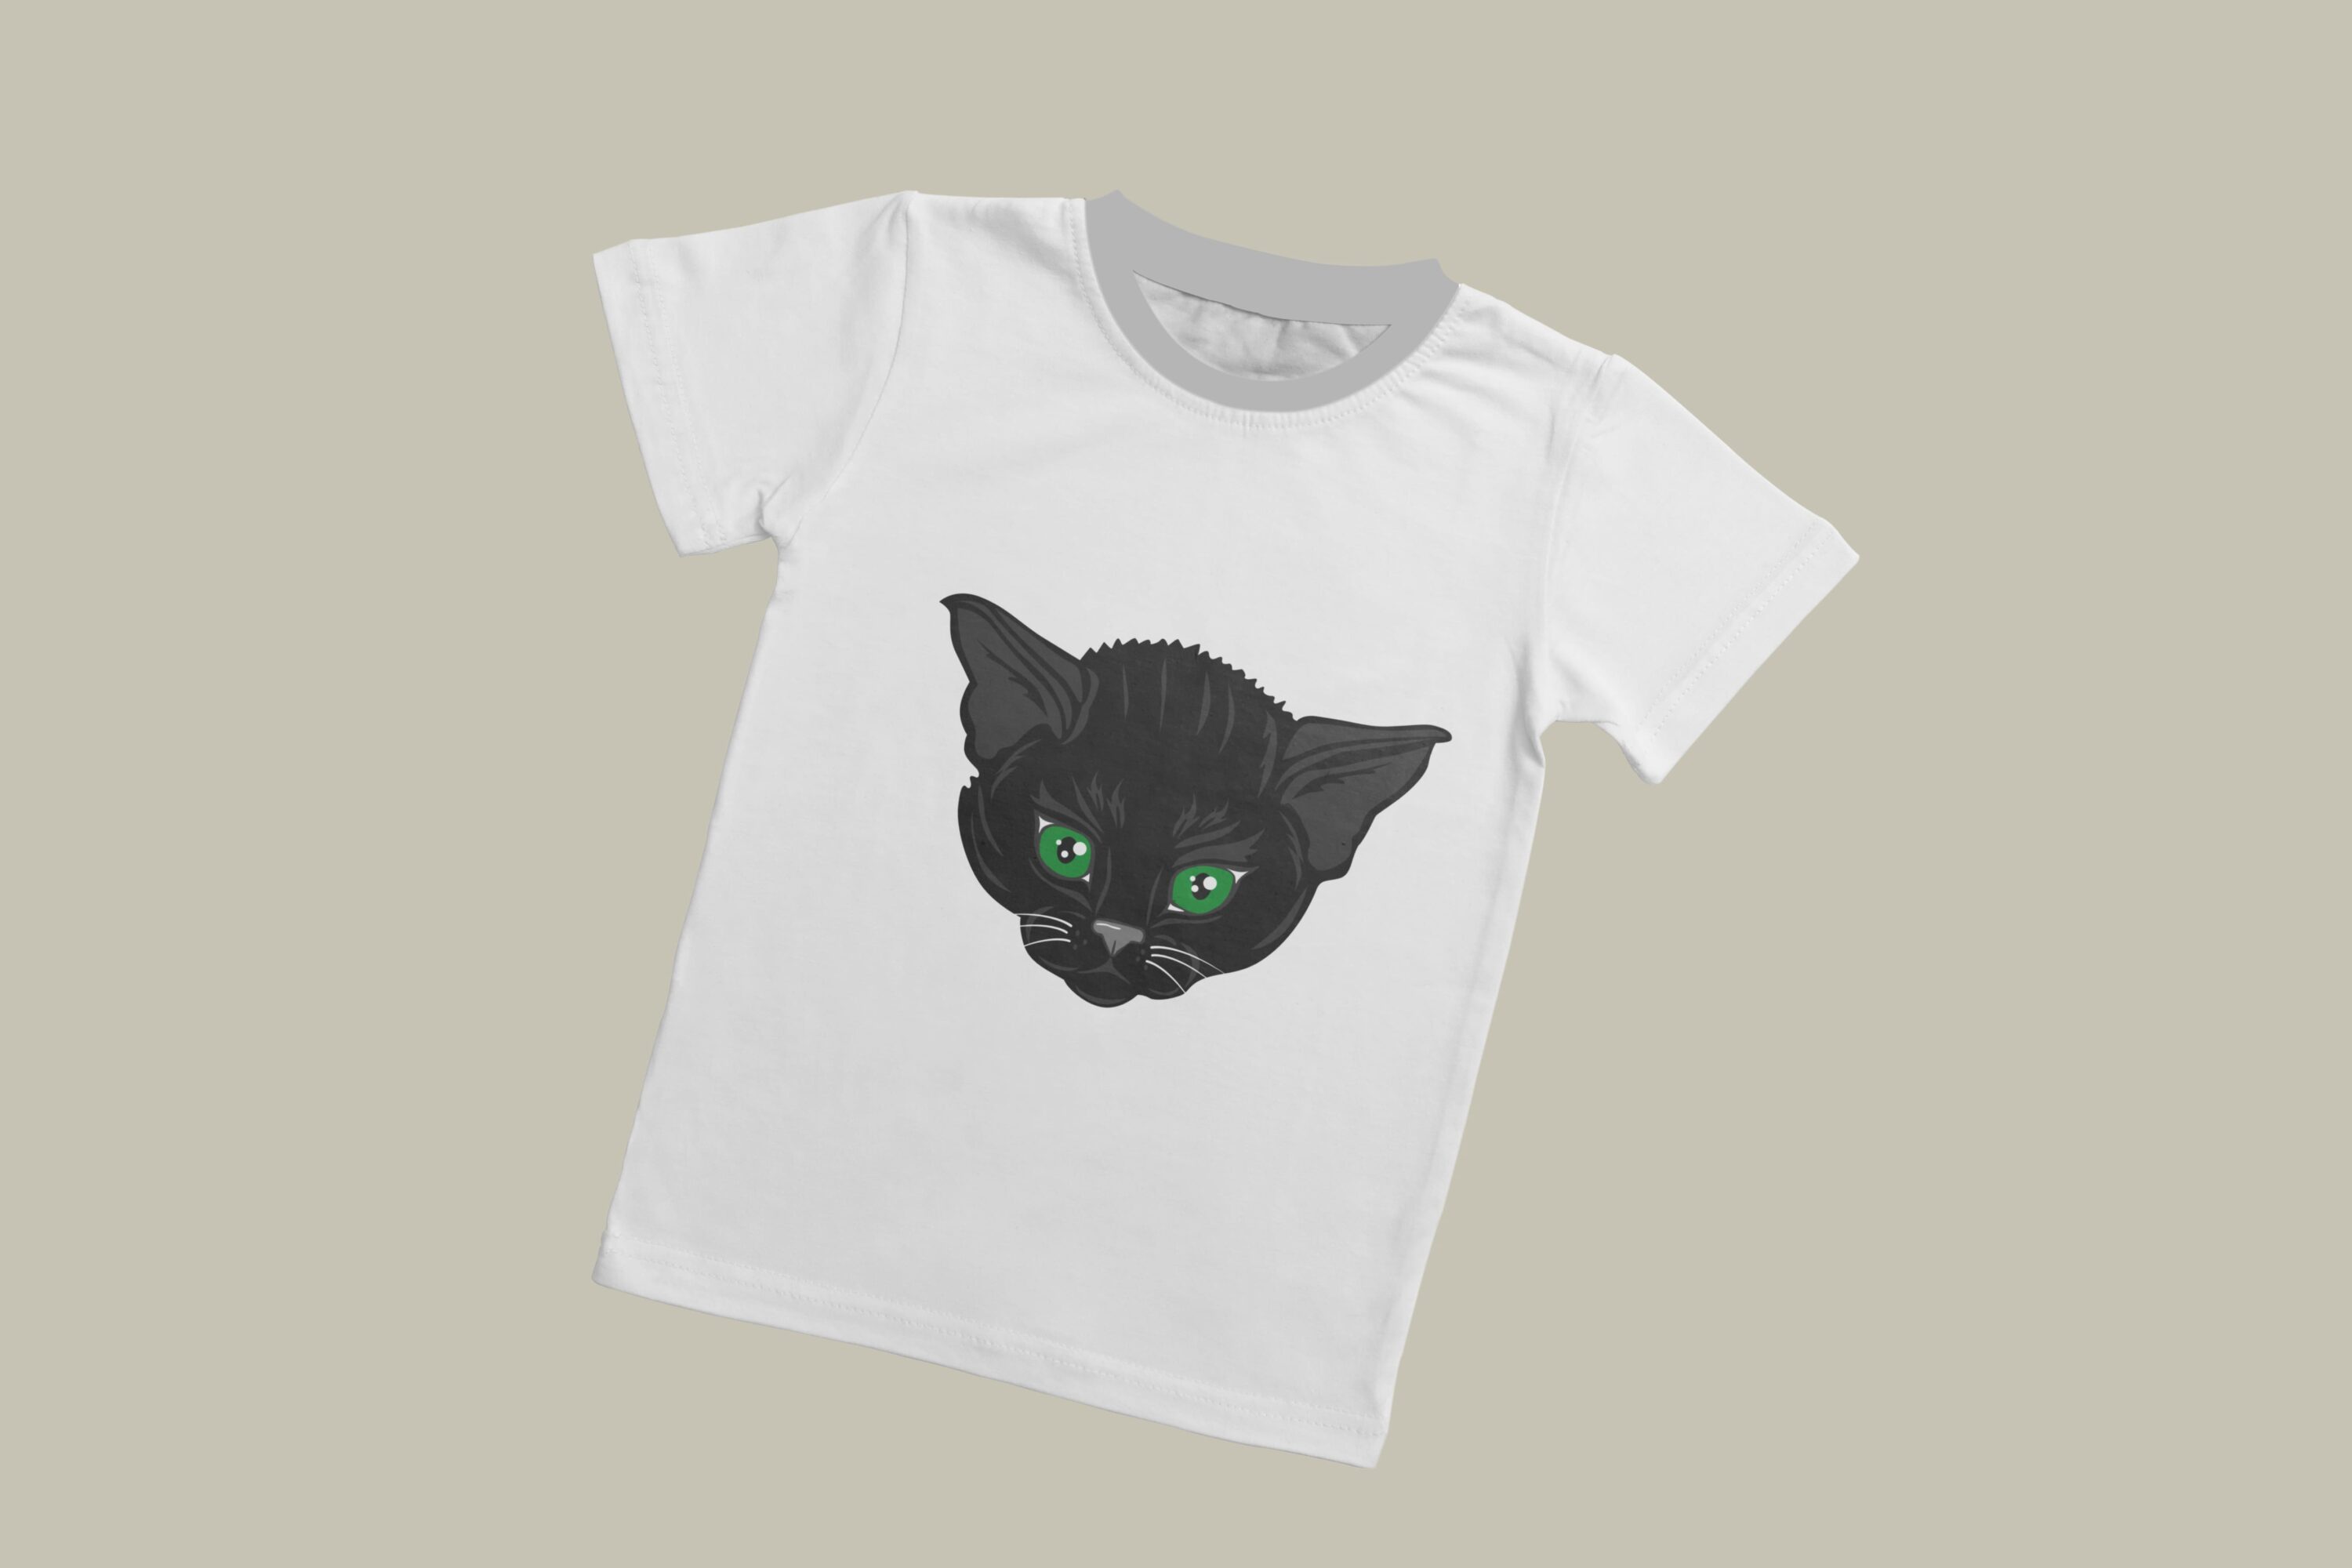 A white T-shirt with a grey collar and the face of a little black cat with green eyes on a grey background.